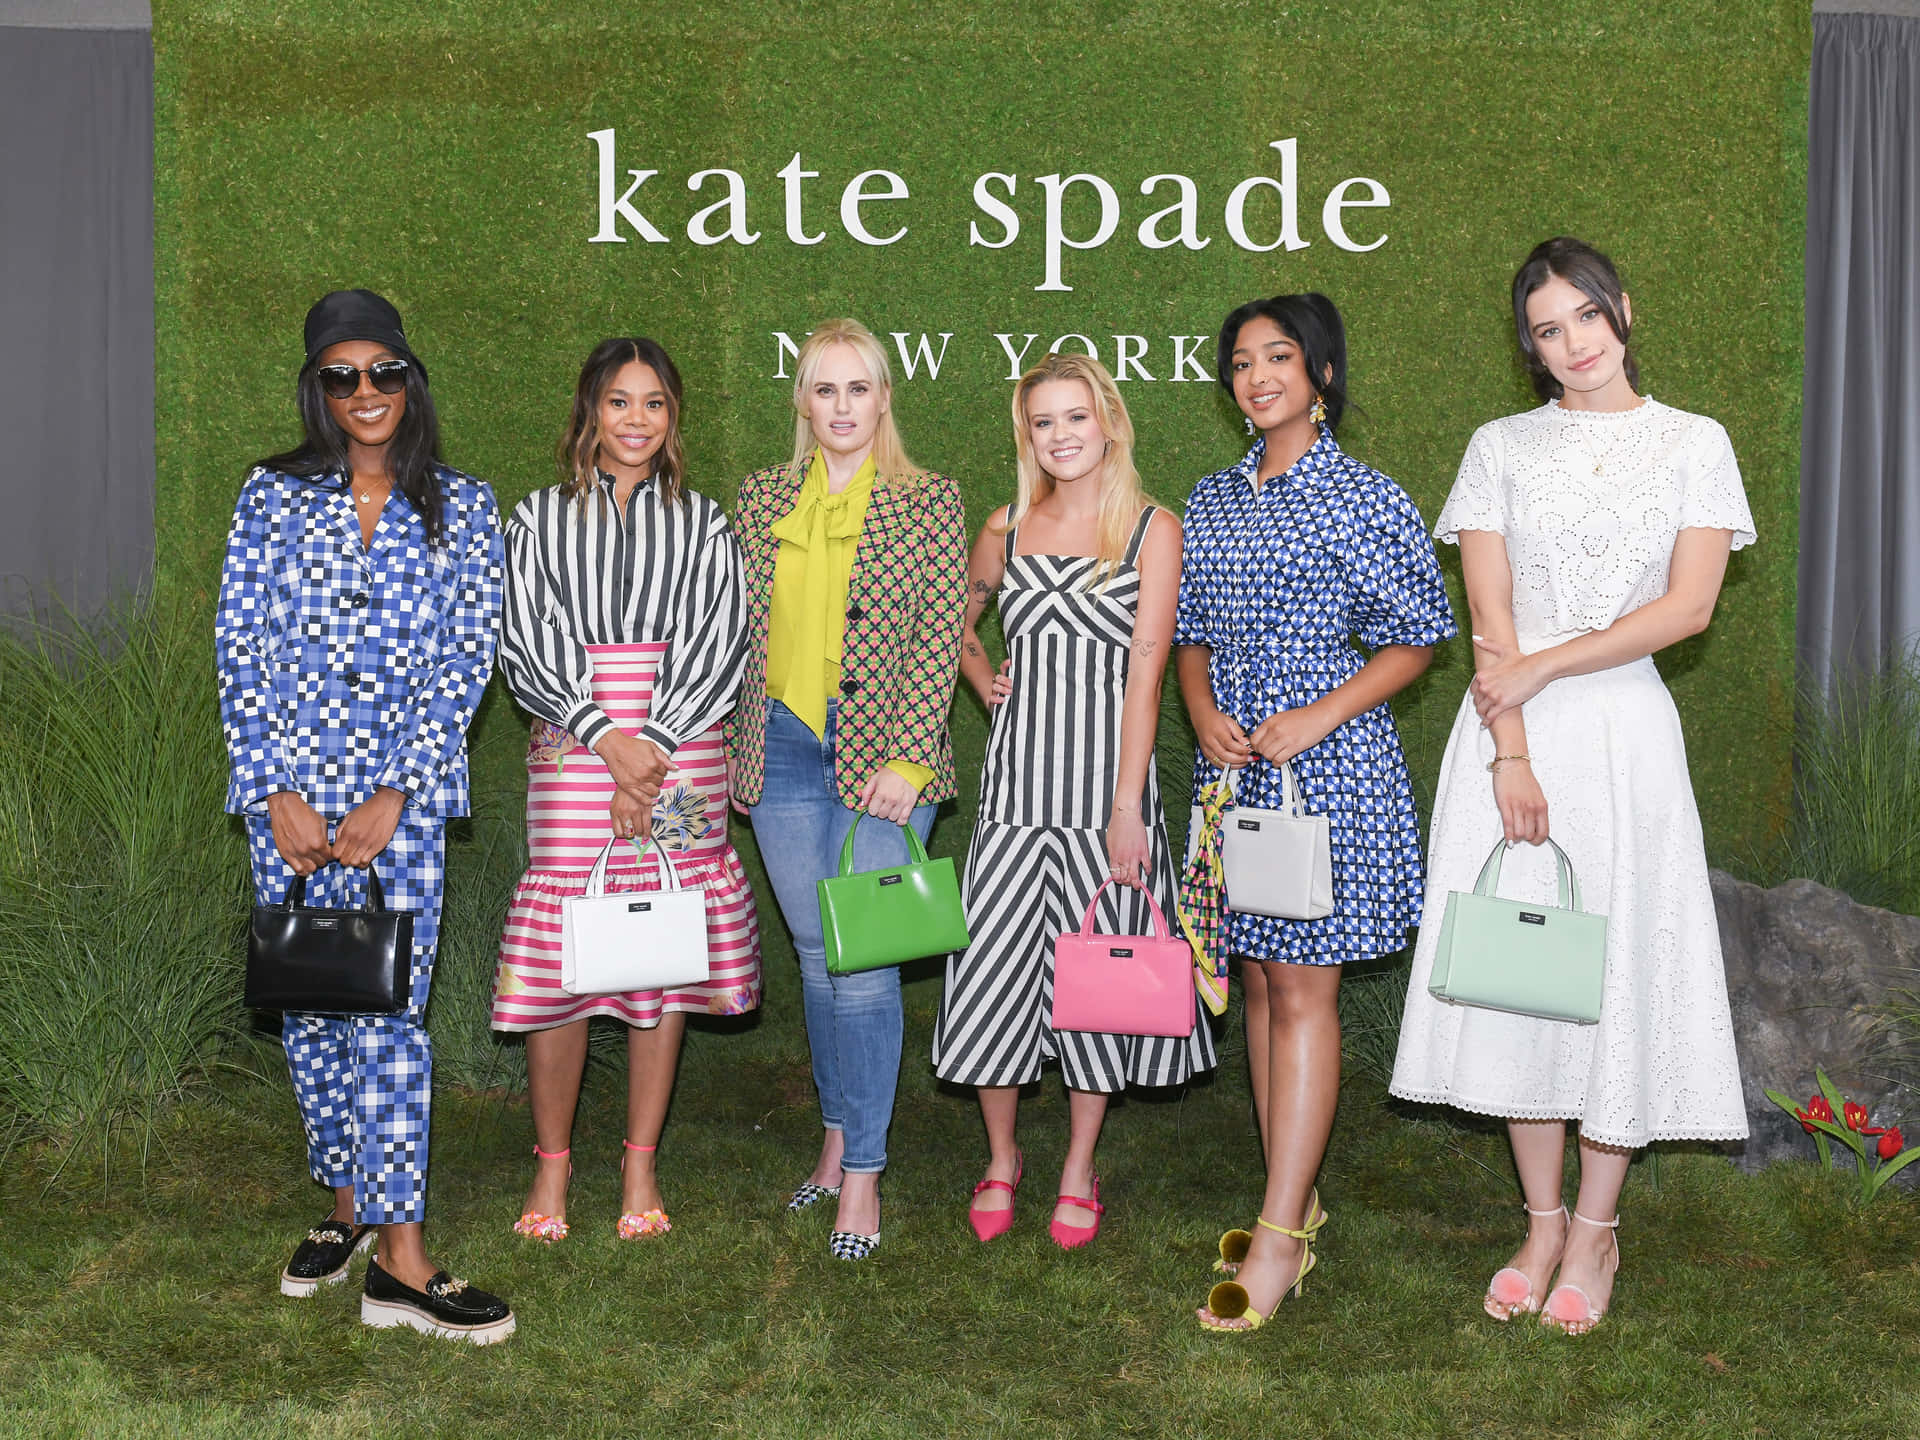 Add a little sparkle and shine to your ensemble with Kate Spade